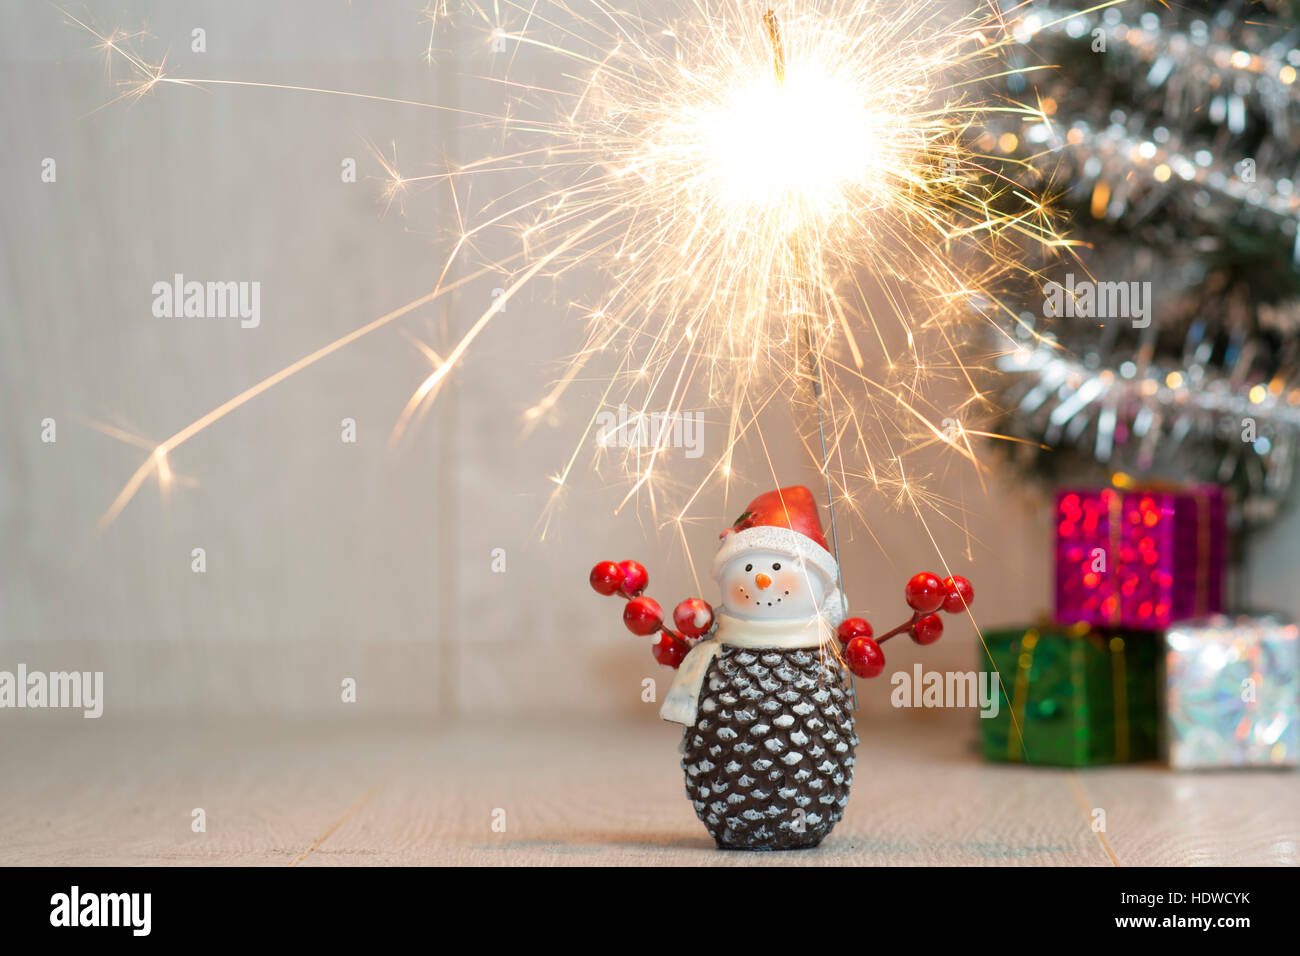 Christmas. Sparklers. Snowman. Gifts Stock Photo